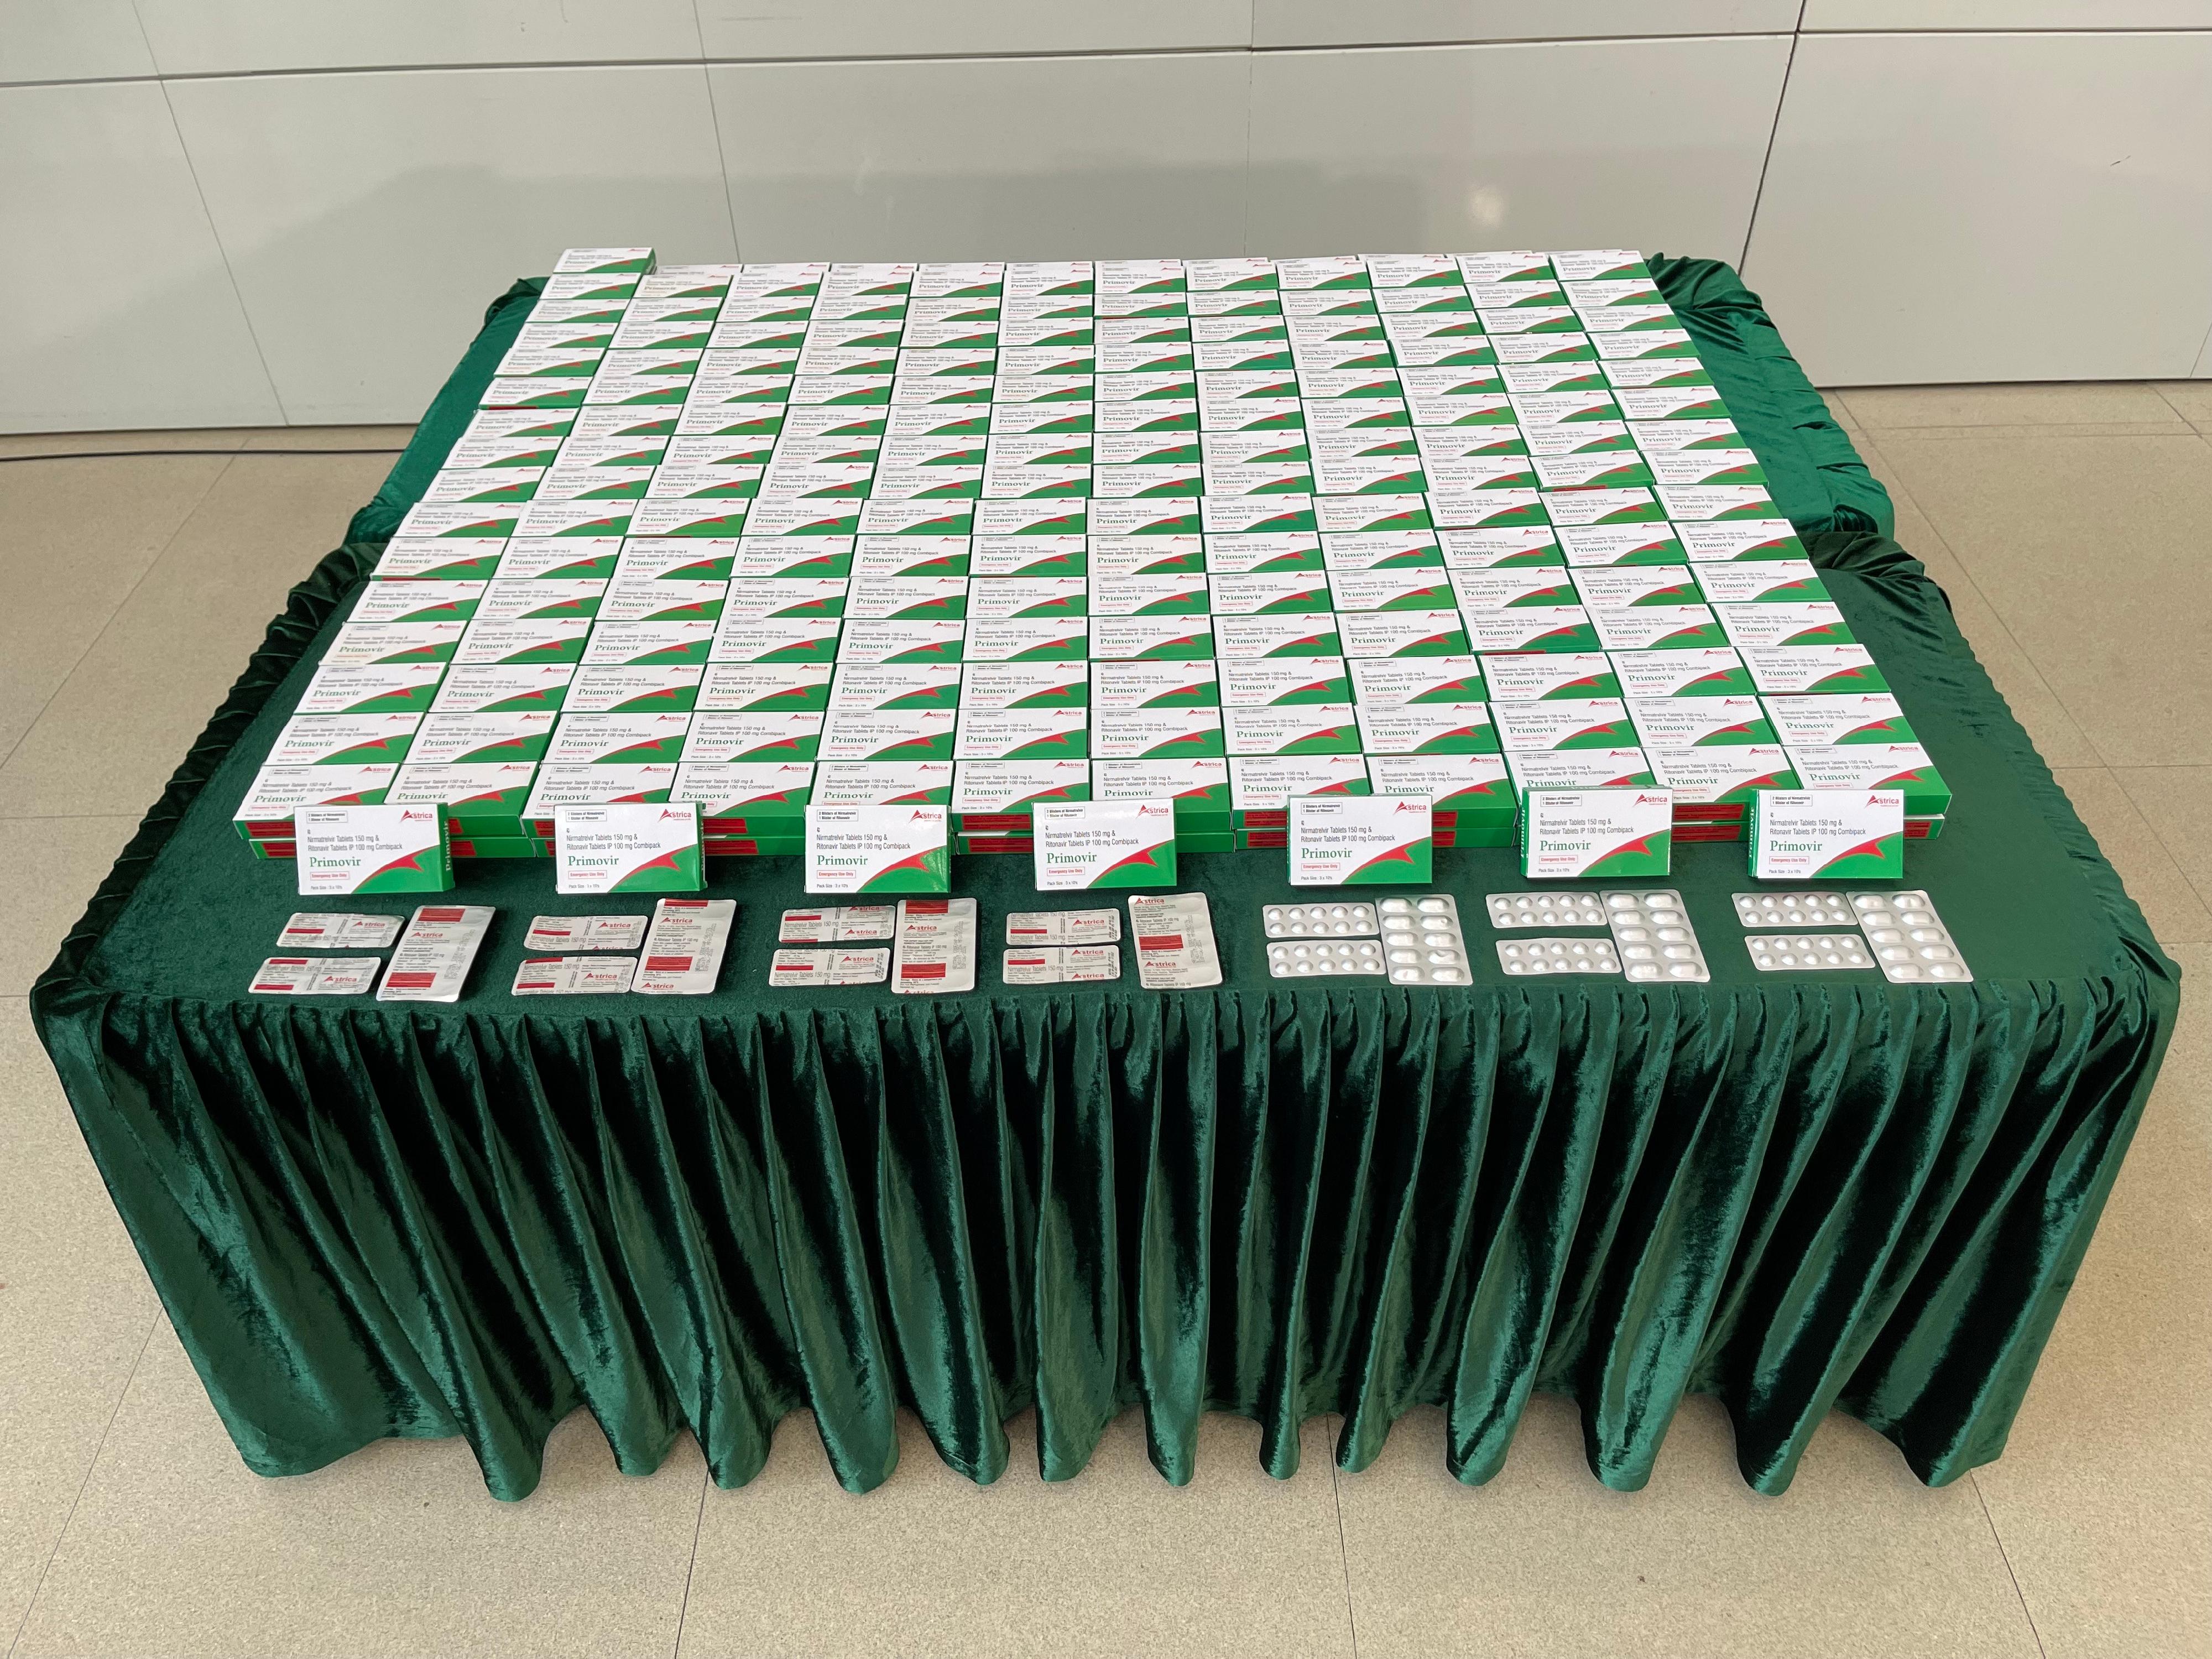 Hong Kong Customs seized about 380 boxes of suspected smuggled COVID-19 oral drugs with an estimated market value of about $500,000 at Hong Kong International Airport and in Tin Shui Wai on January 11 and 14 respectively. Photo shows the suspected smuggled COVID-19 oral drugs seized. 